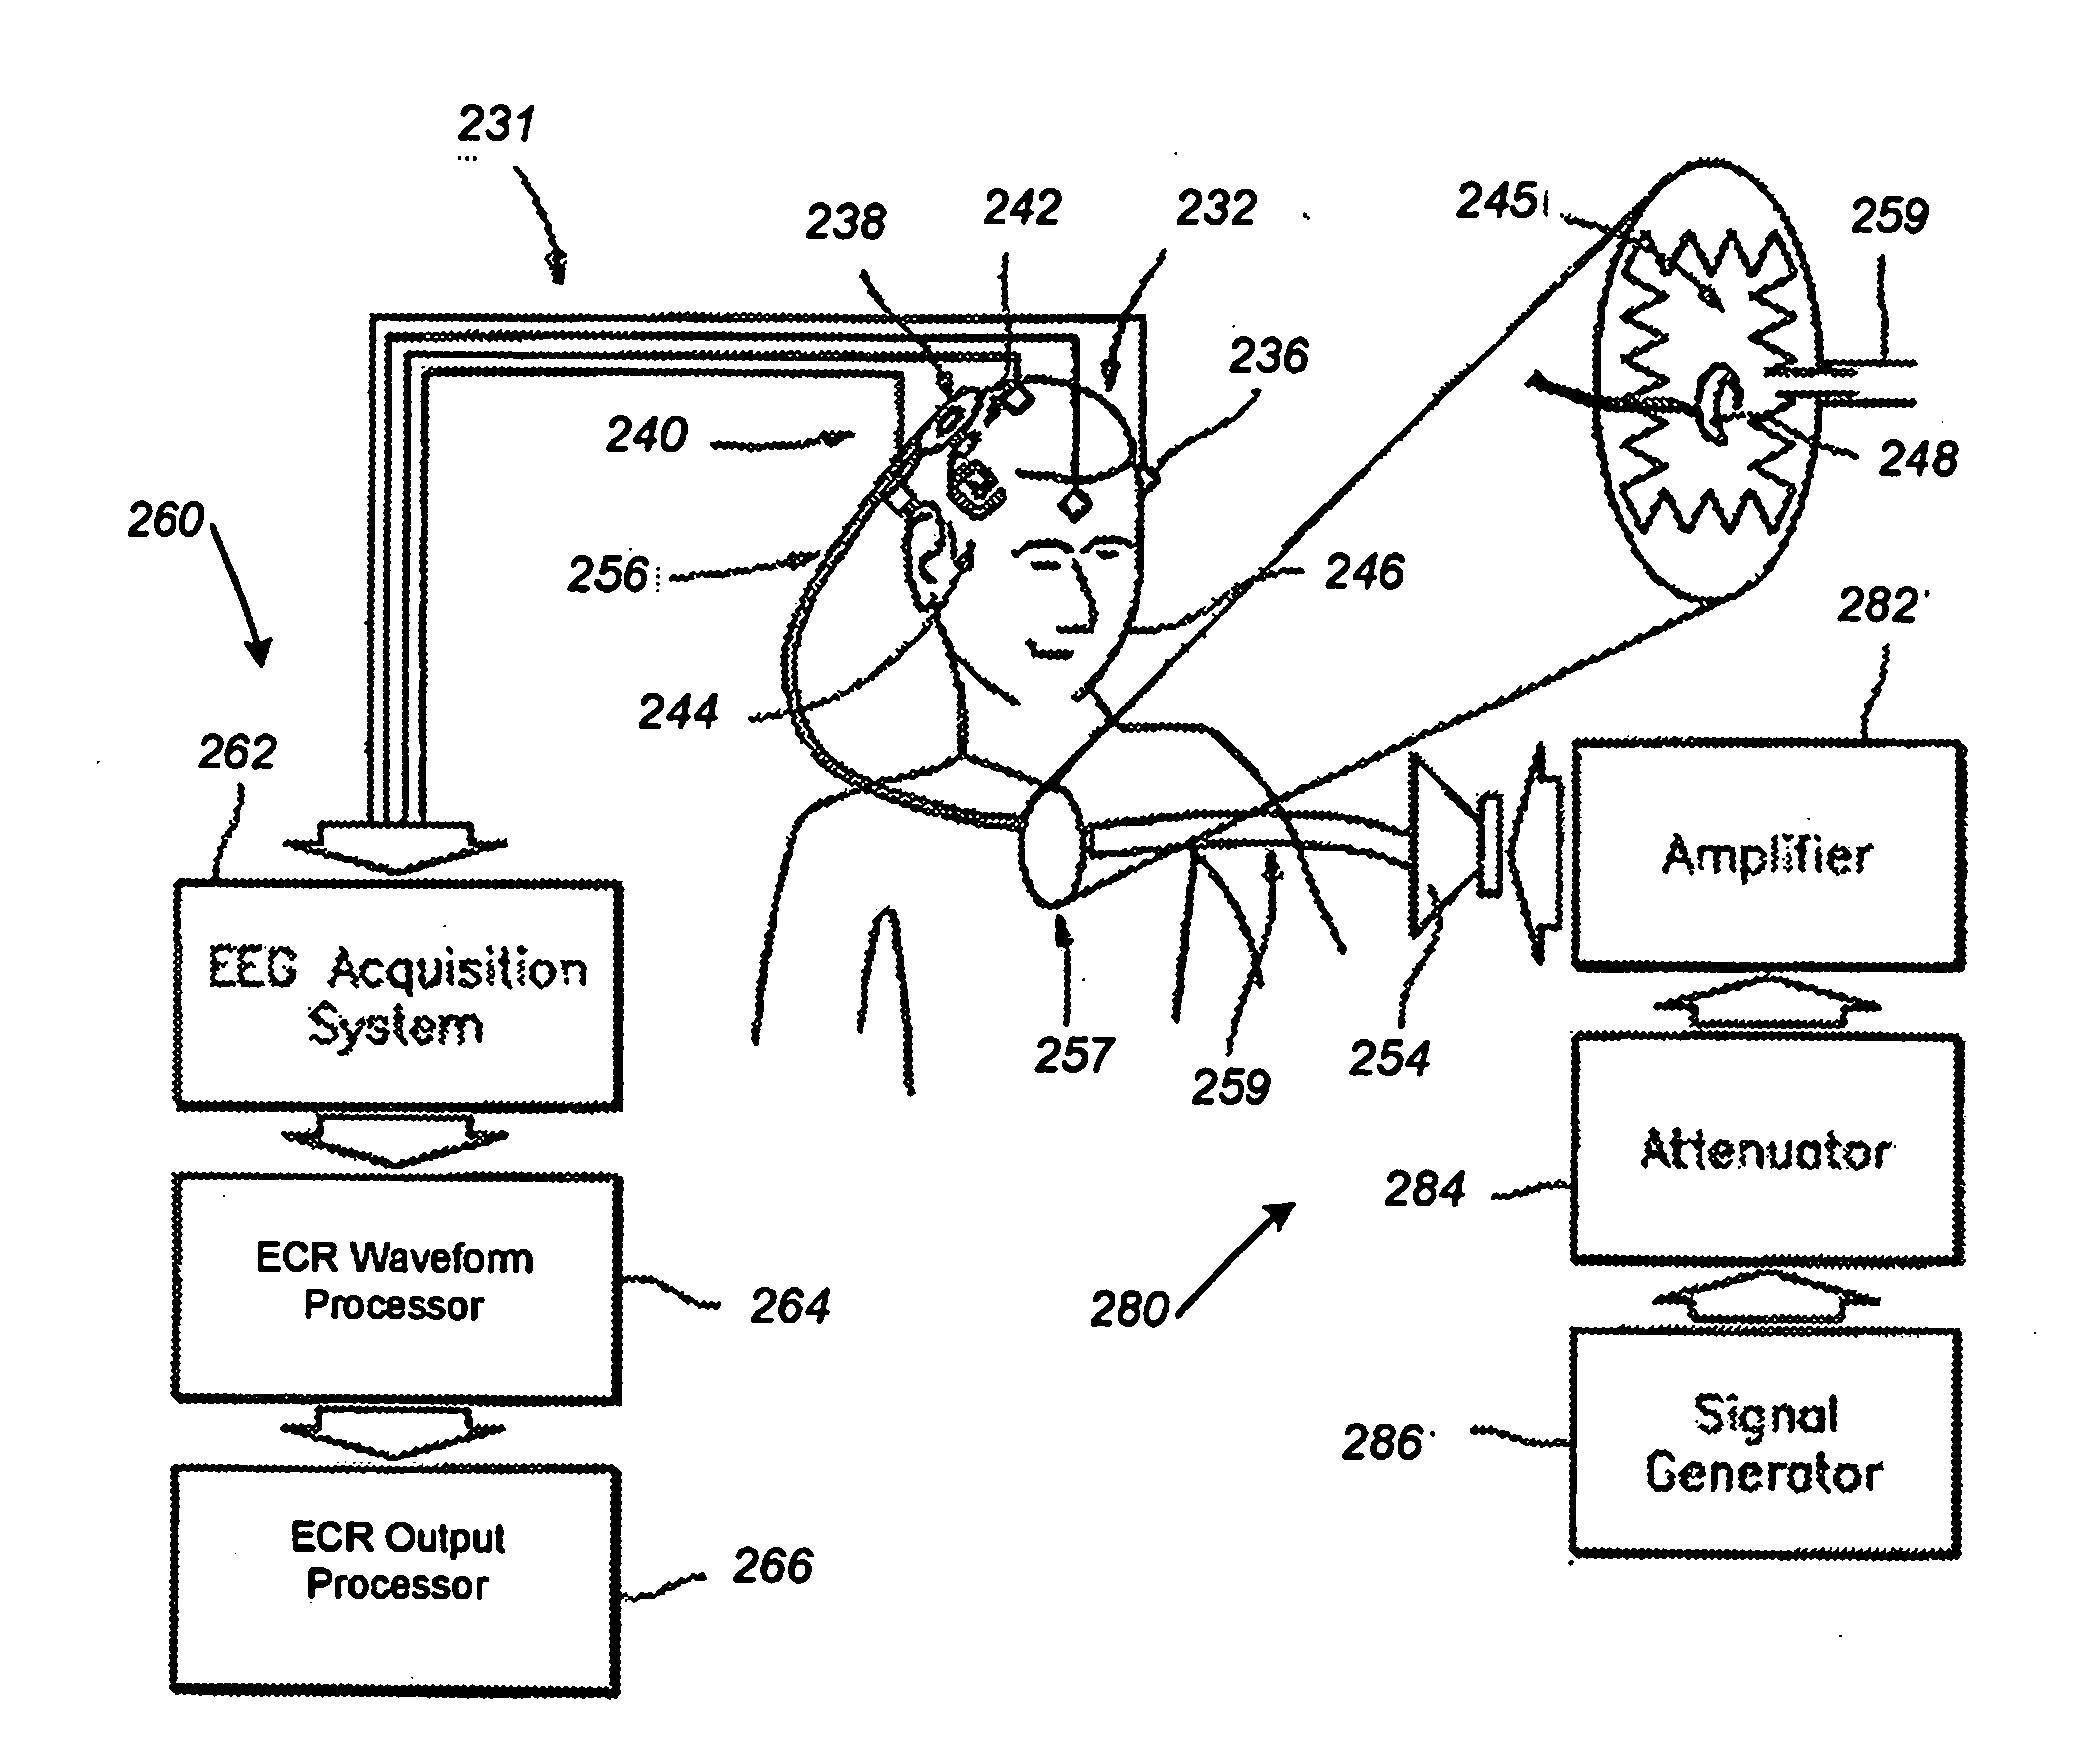 Systems and Methods for Detecting and Using an Electrical Cochlear Response ("ECR") in Analyzing Operation of a Cochlear Stimulation System